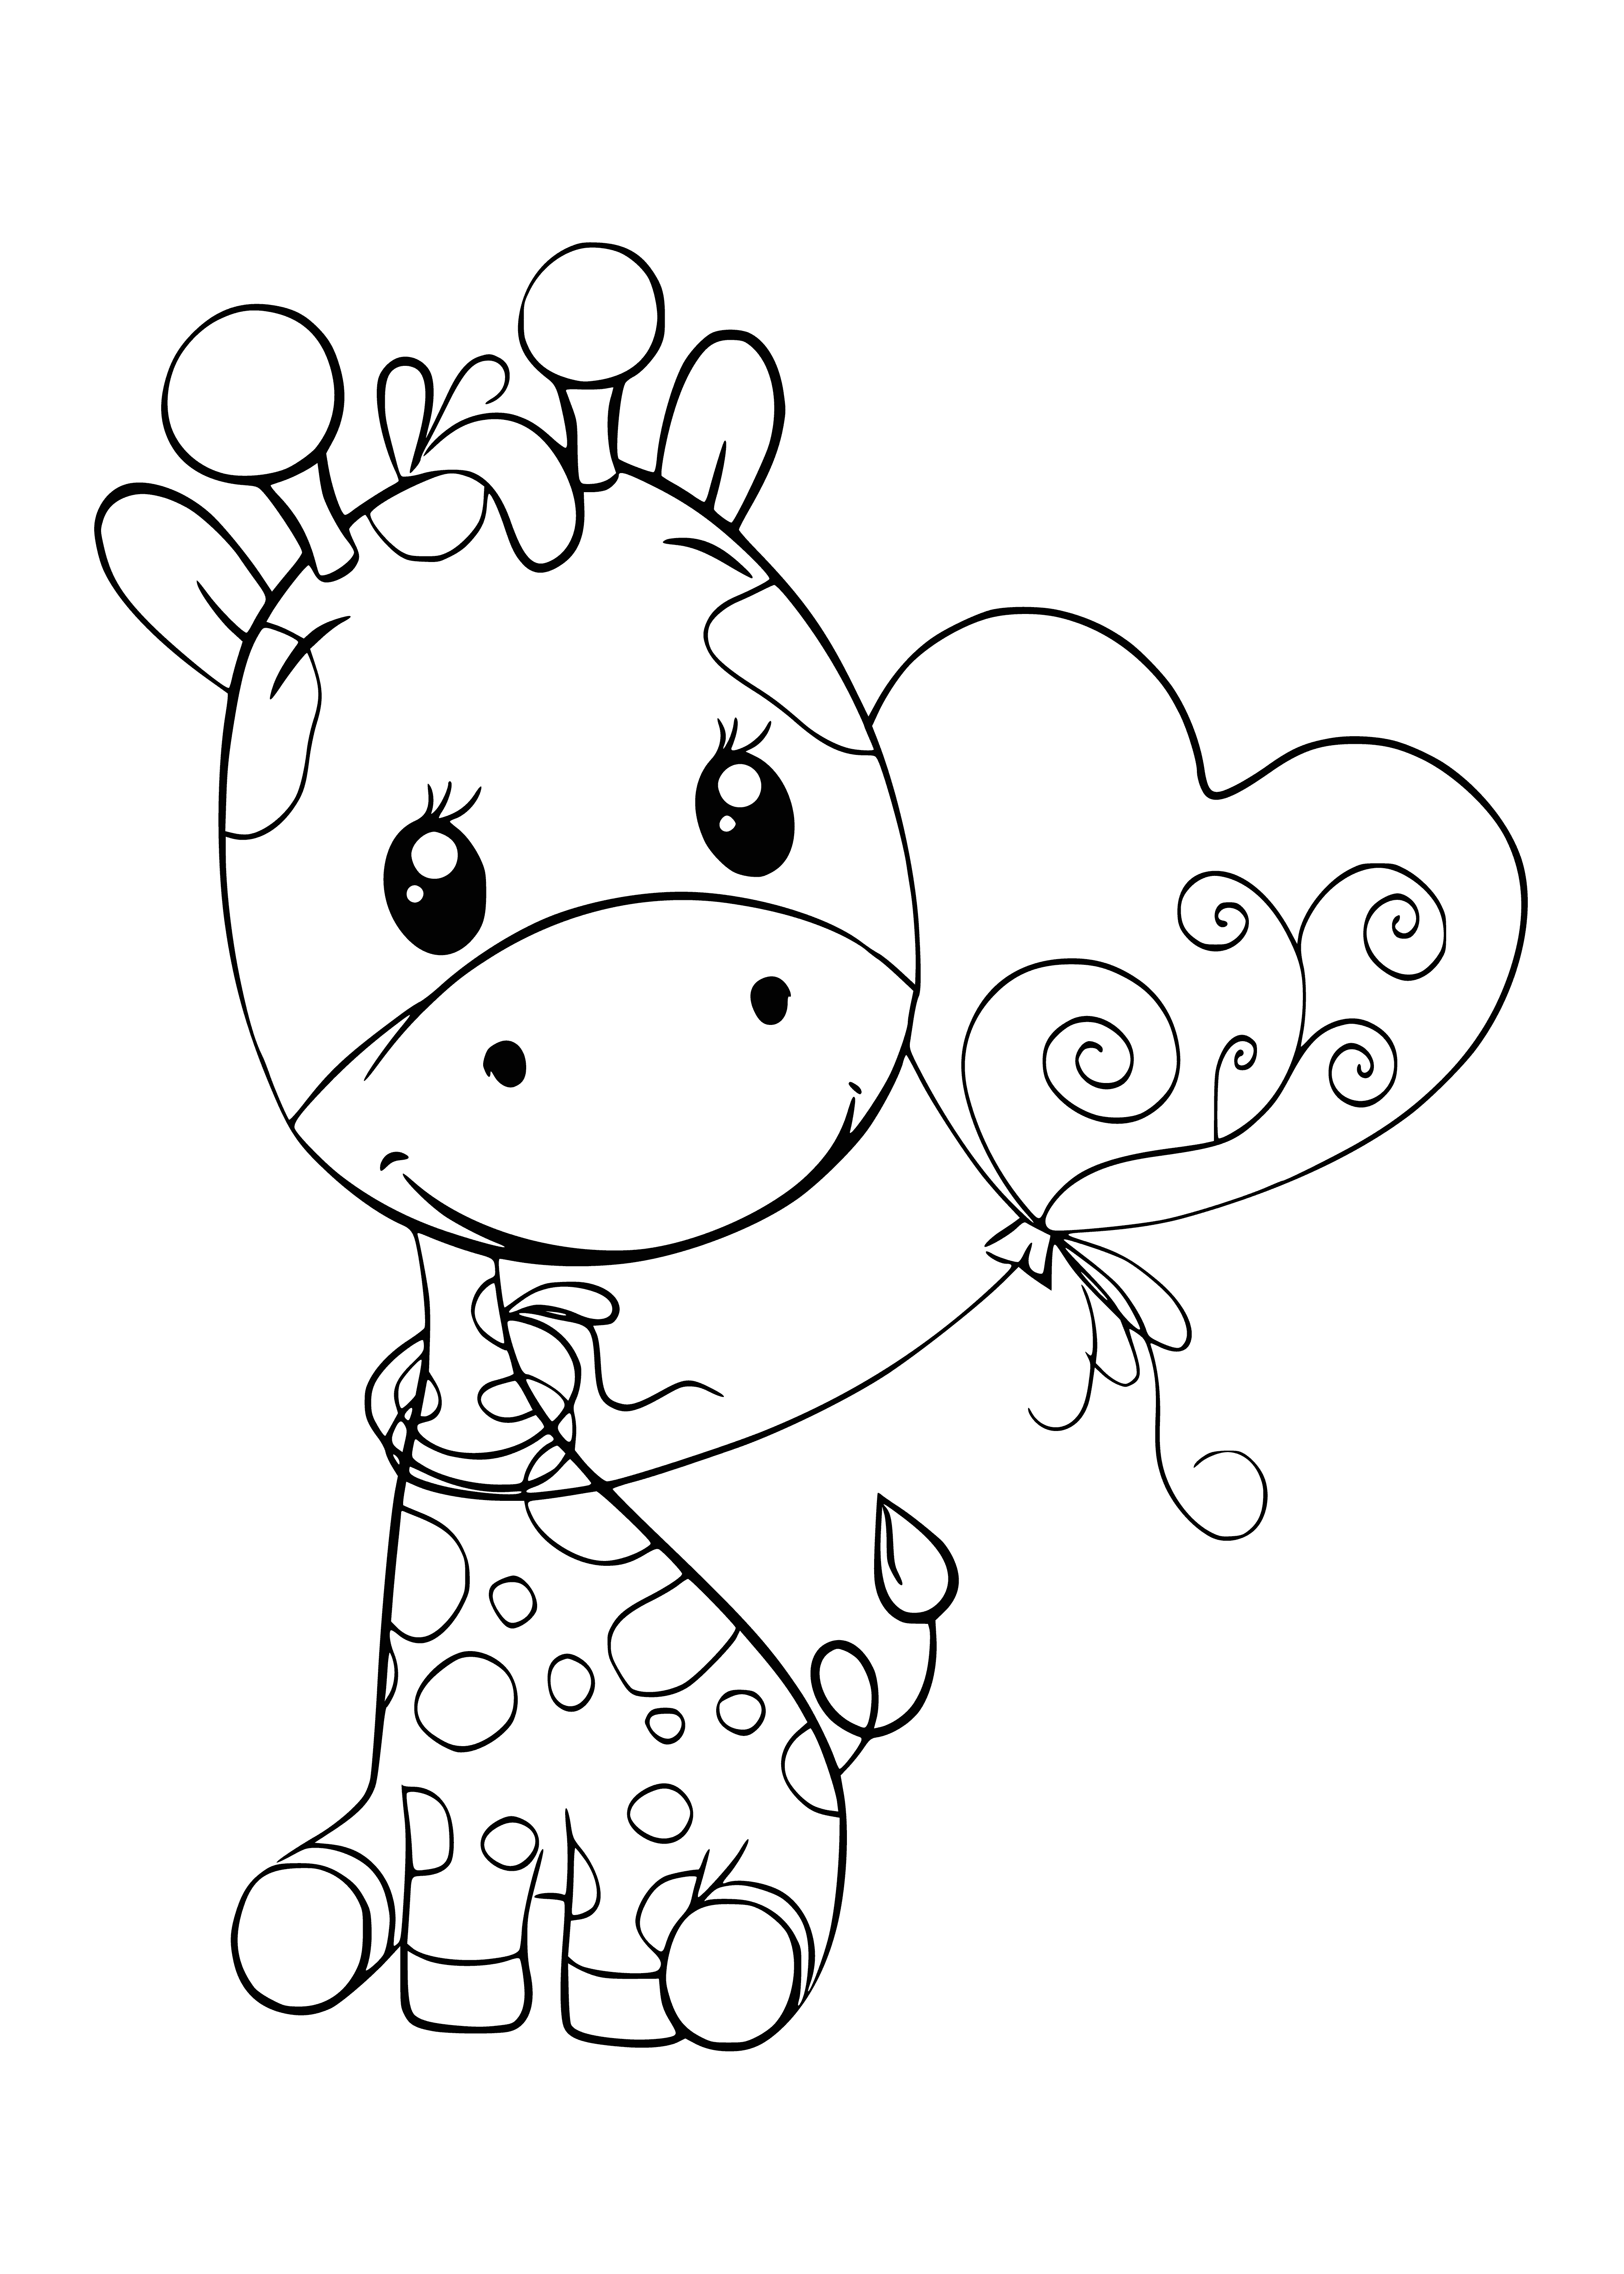 coloring page: A giraffe with a bow & arrow painted in black & white. #art